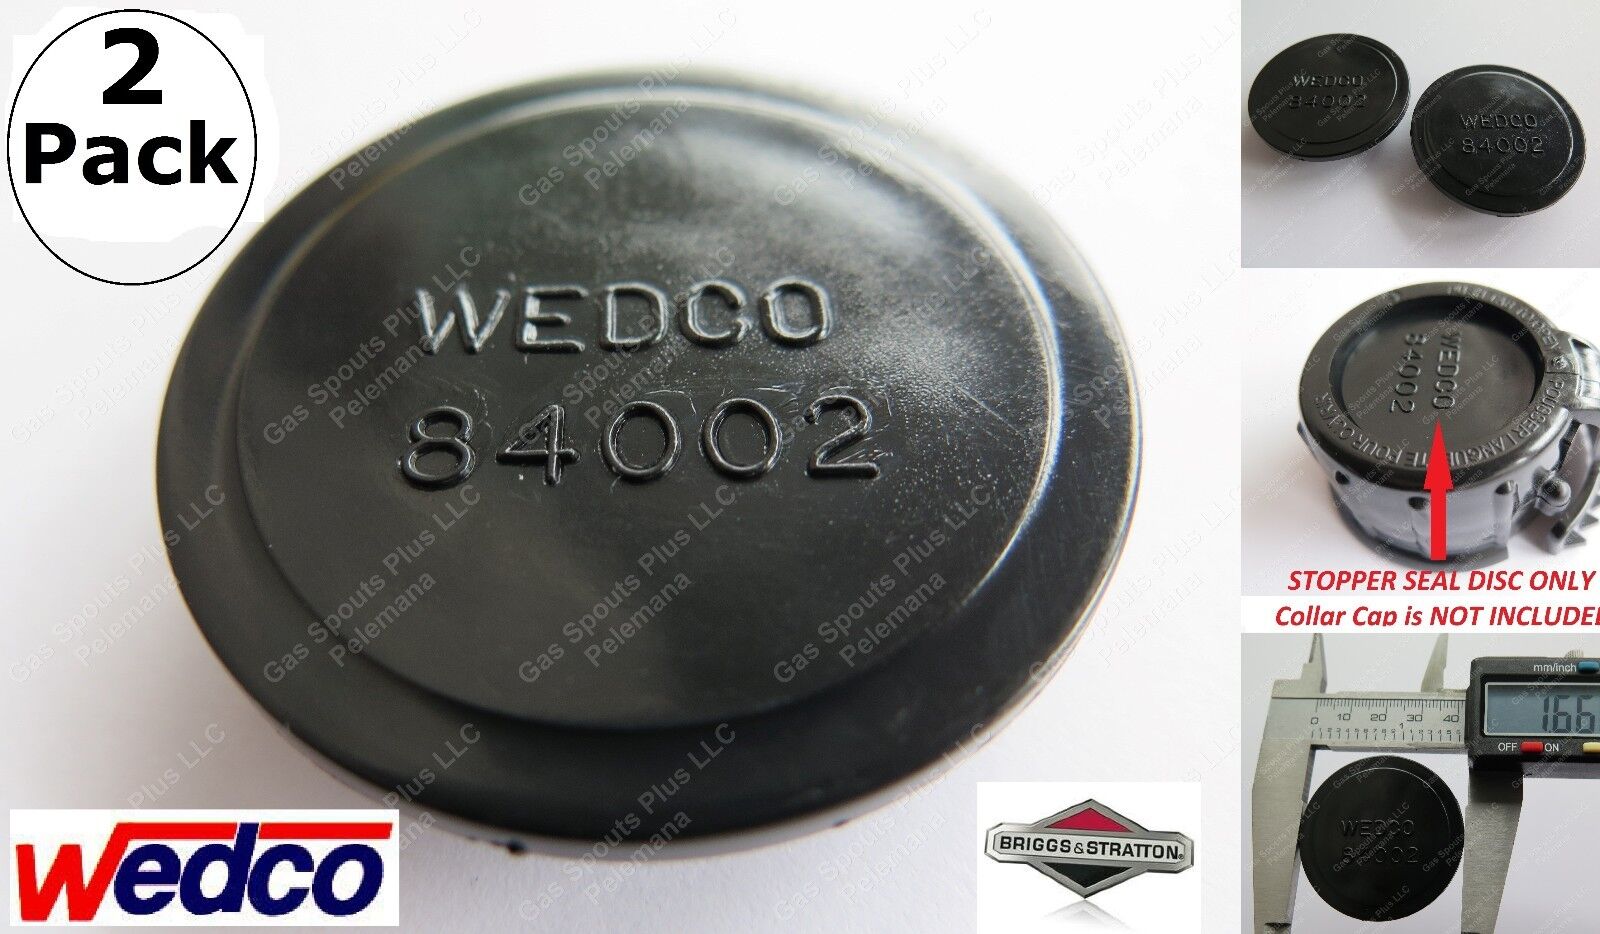 2-Pack Wedco Black Stopper Seal Discs 84002 Replacement Gas Can Parts Briggs NEW Wedco, Briggs & Stratton 80436